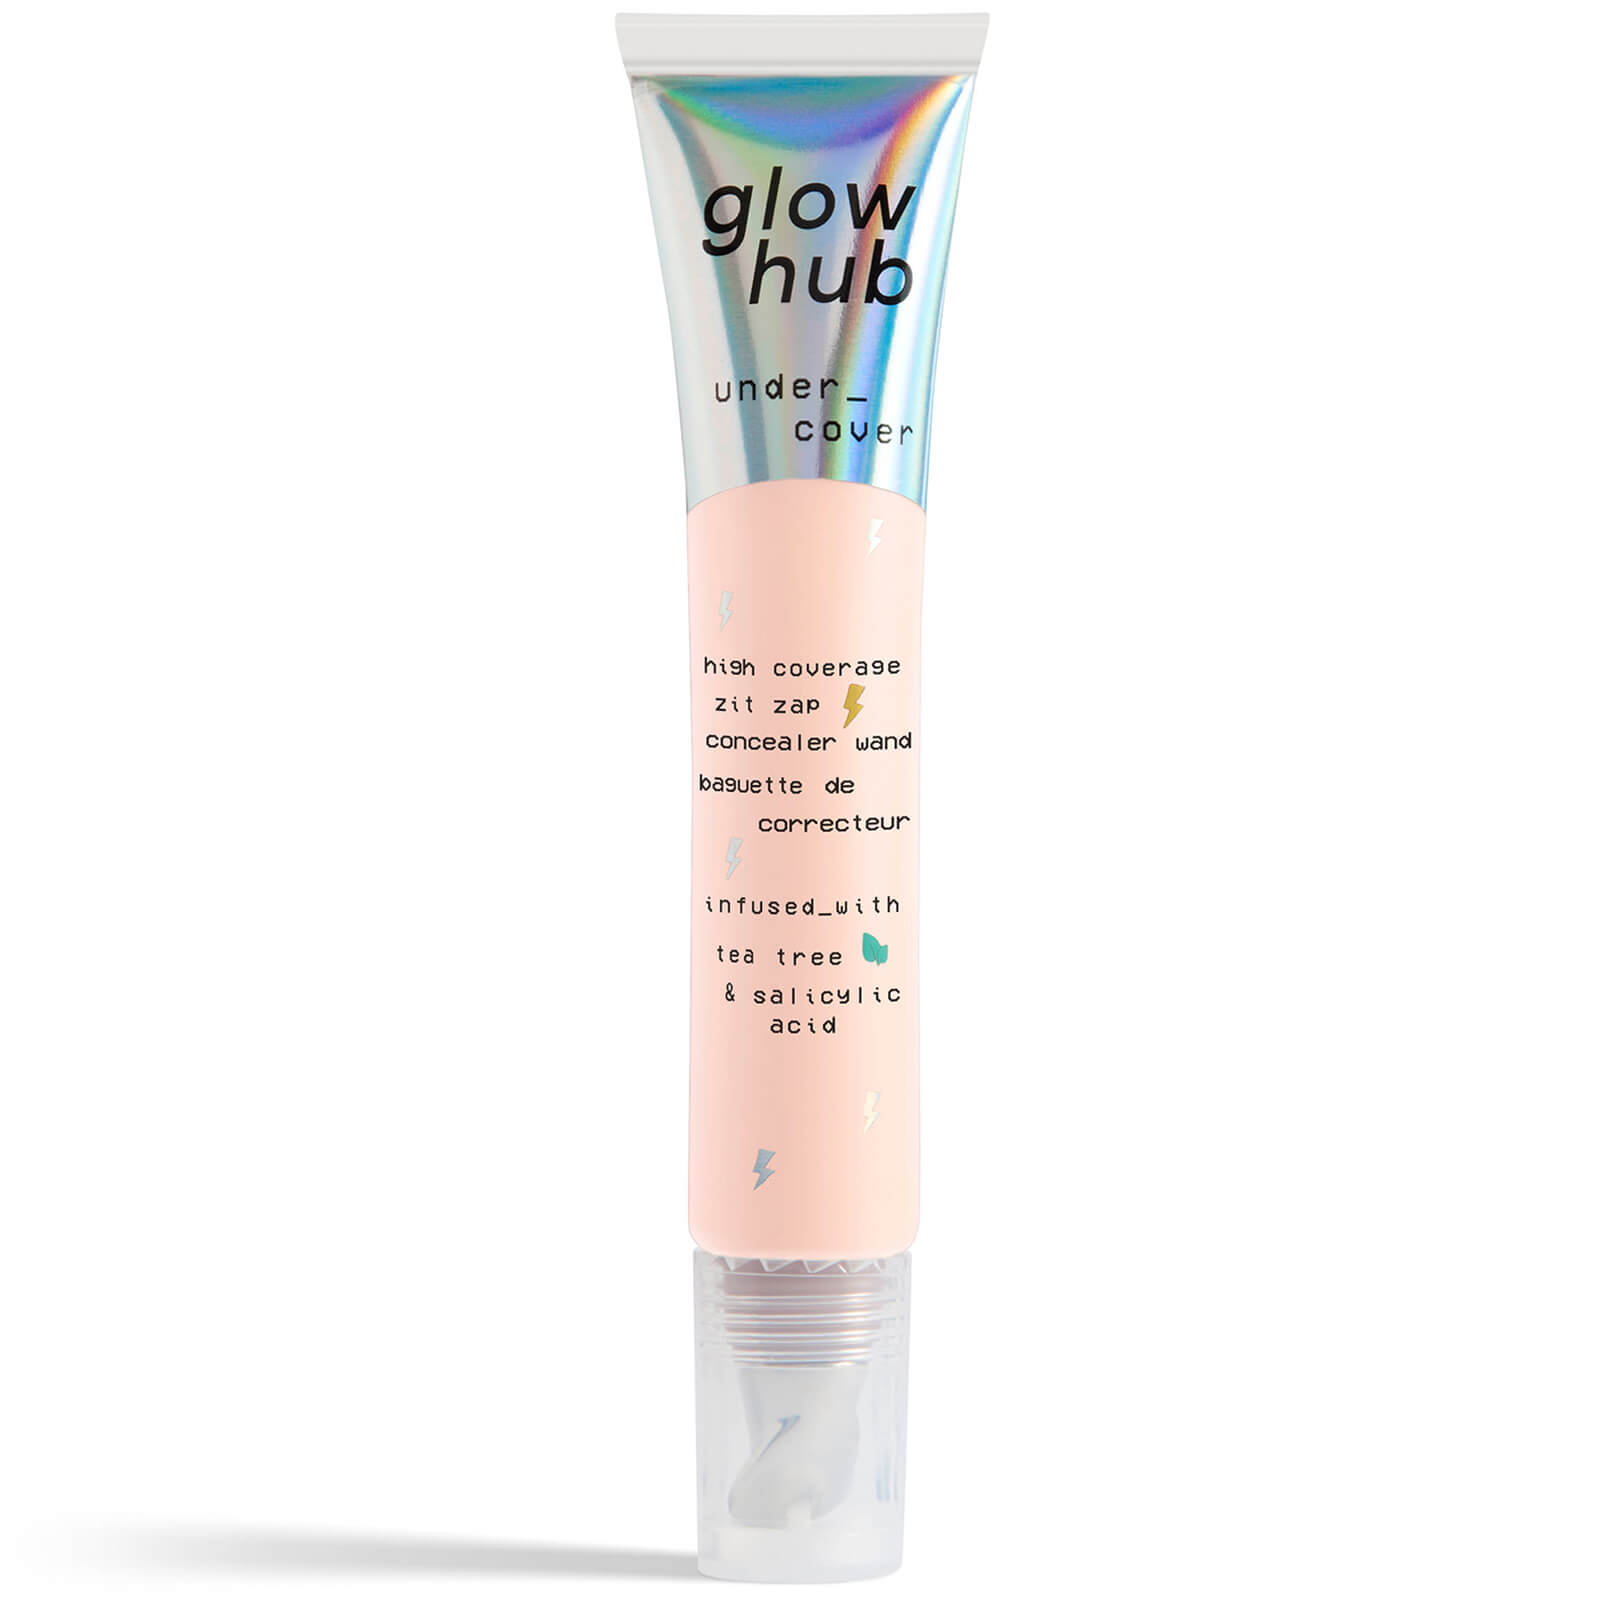 Image of Glow Hub Under Cover High Coverage Zit Zap Concealer Wand 15ml (Various Shades) - 01C